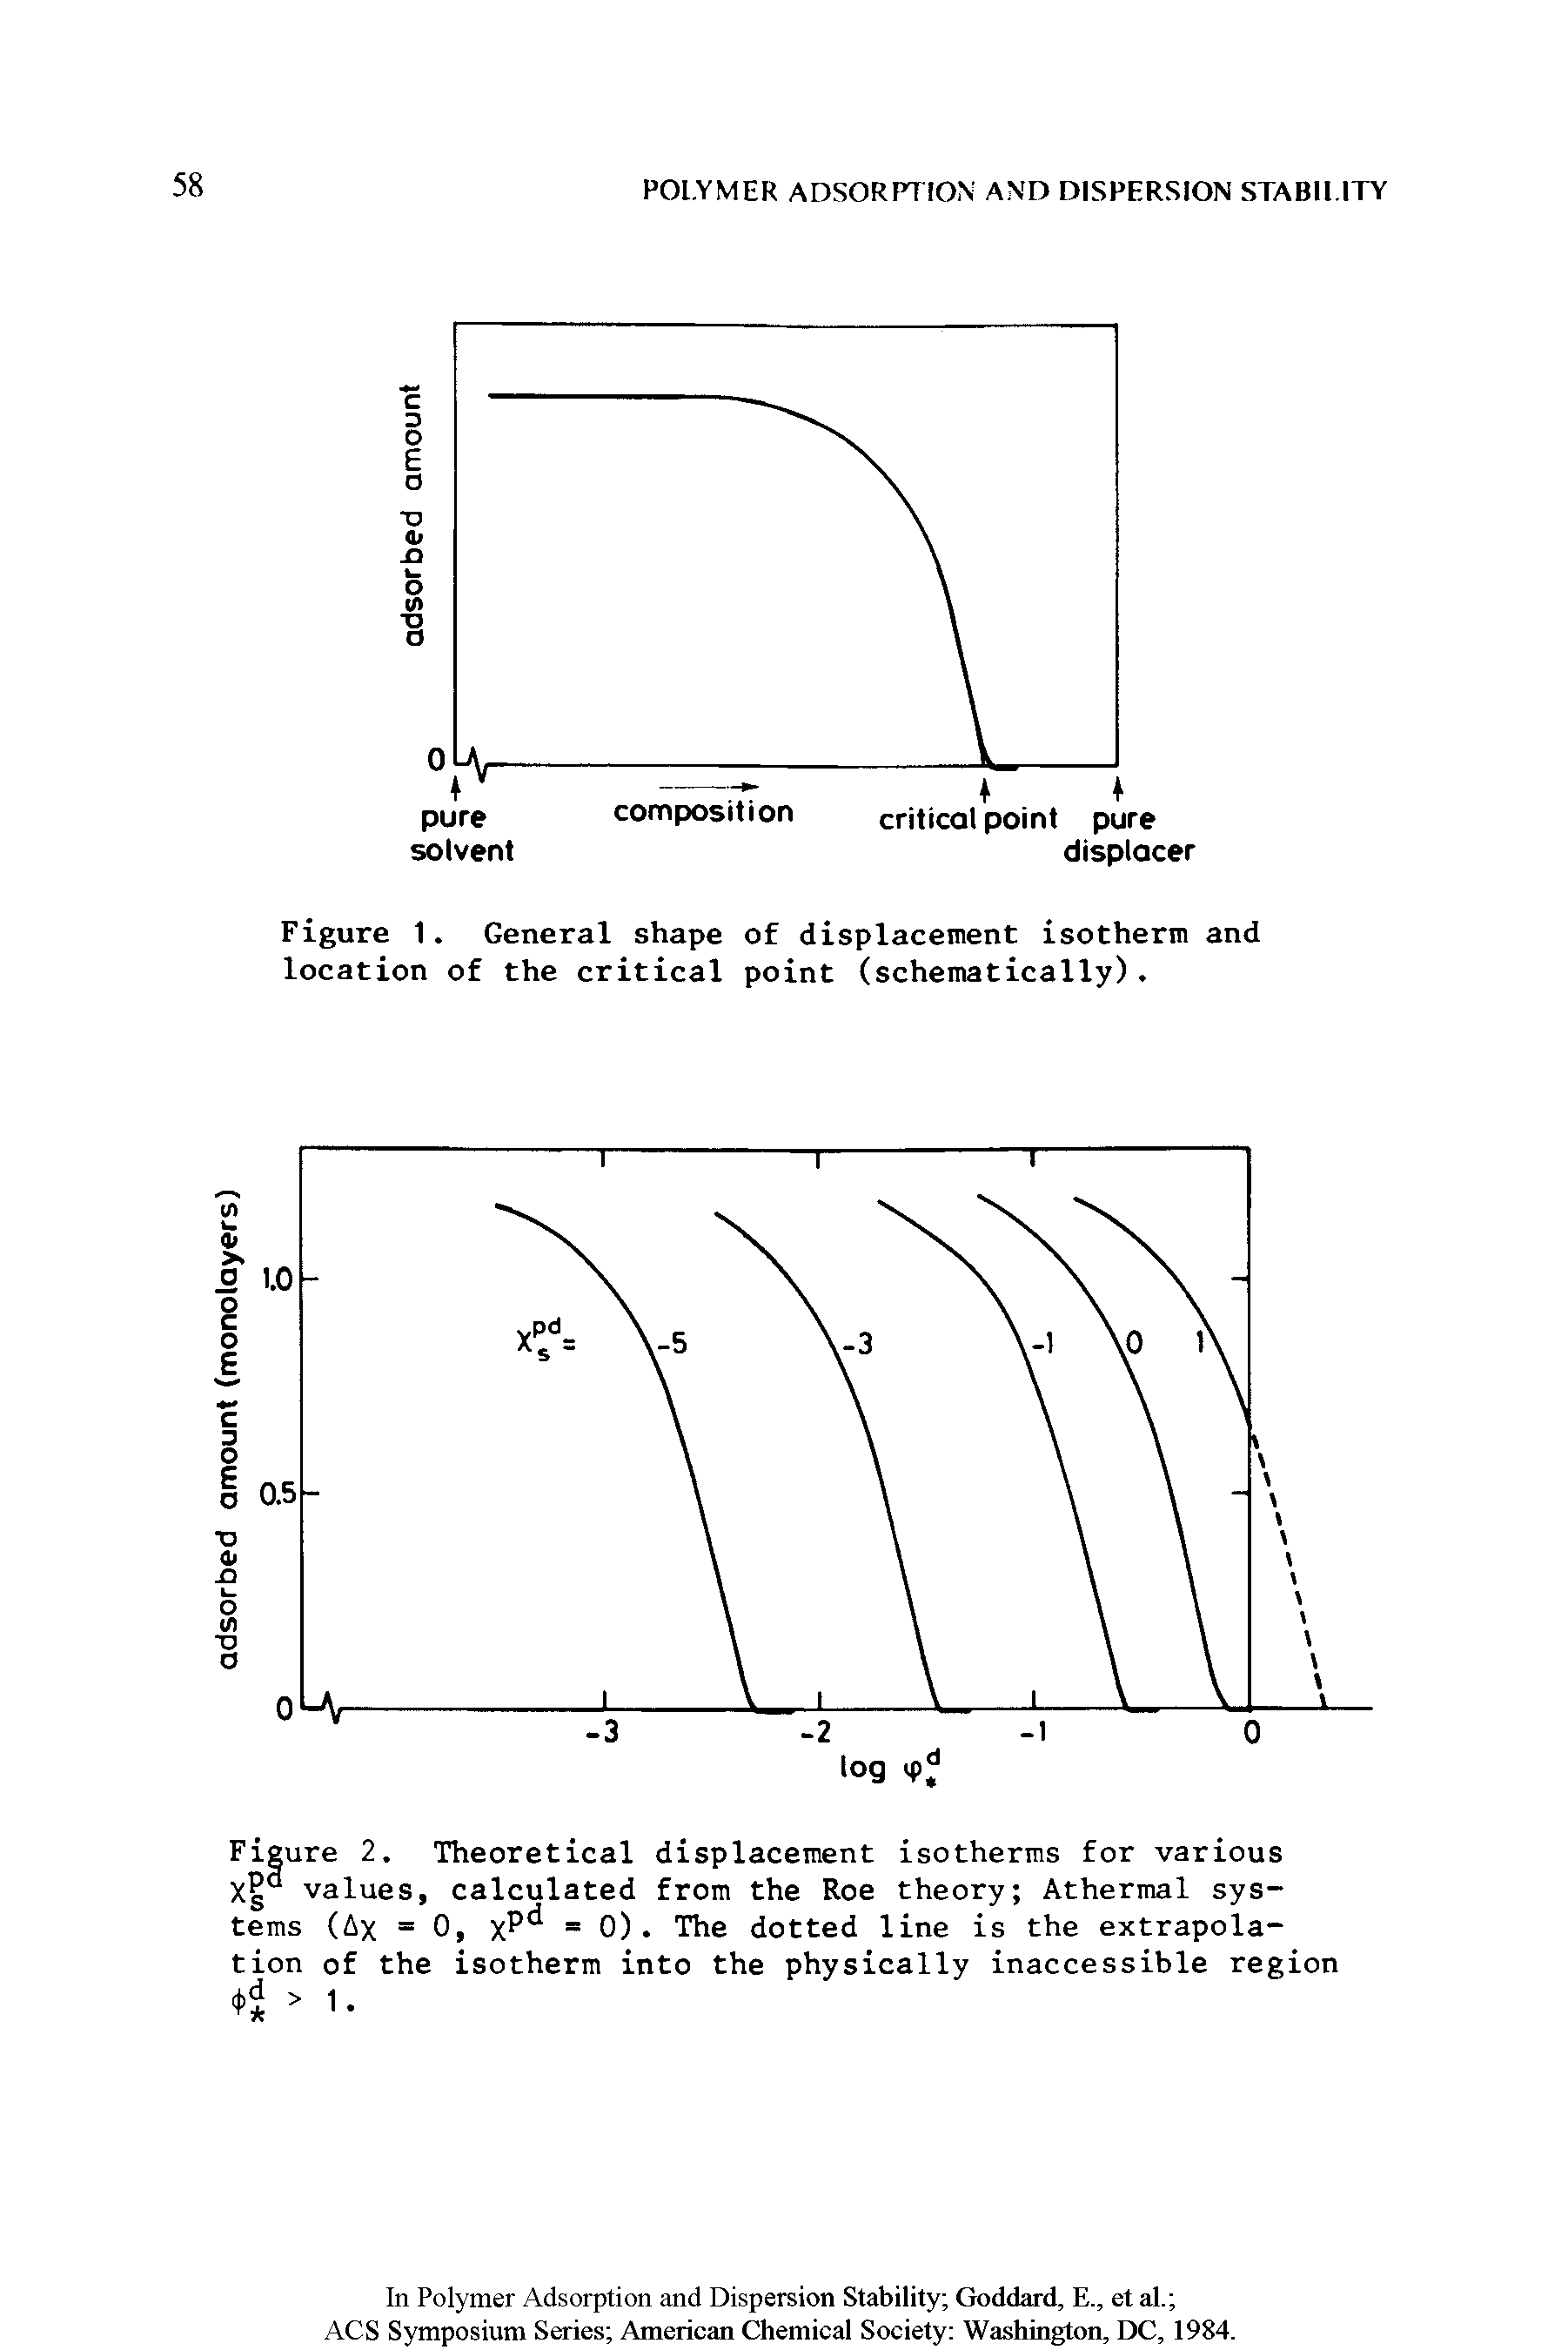 Figure 2. Theoretical displacement isotherms for various values, calculated from the Roe theory Athermal systems (Ax = 0, Xpd = 0). The dotted line is the extrapolation of the isotherm into the physically inaccessible region...